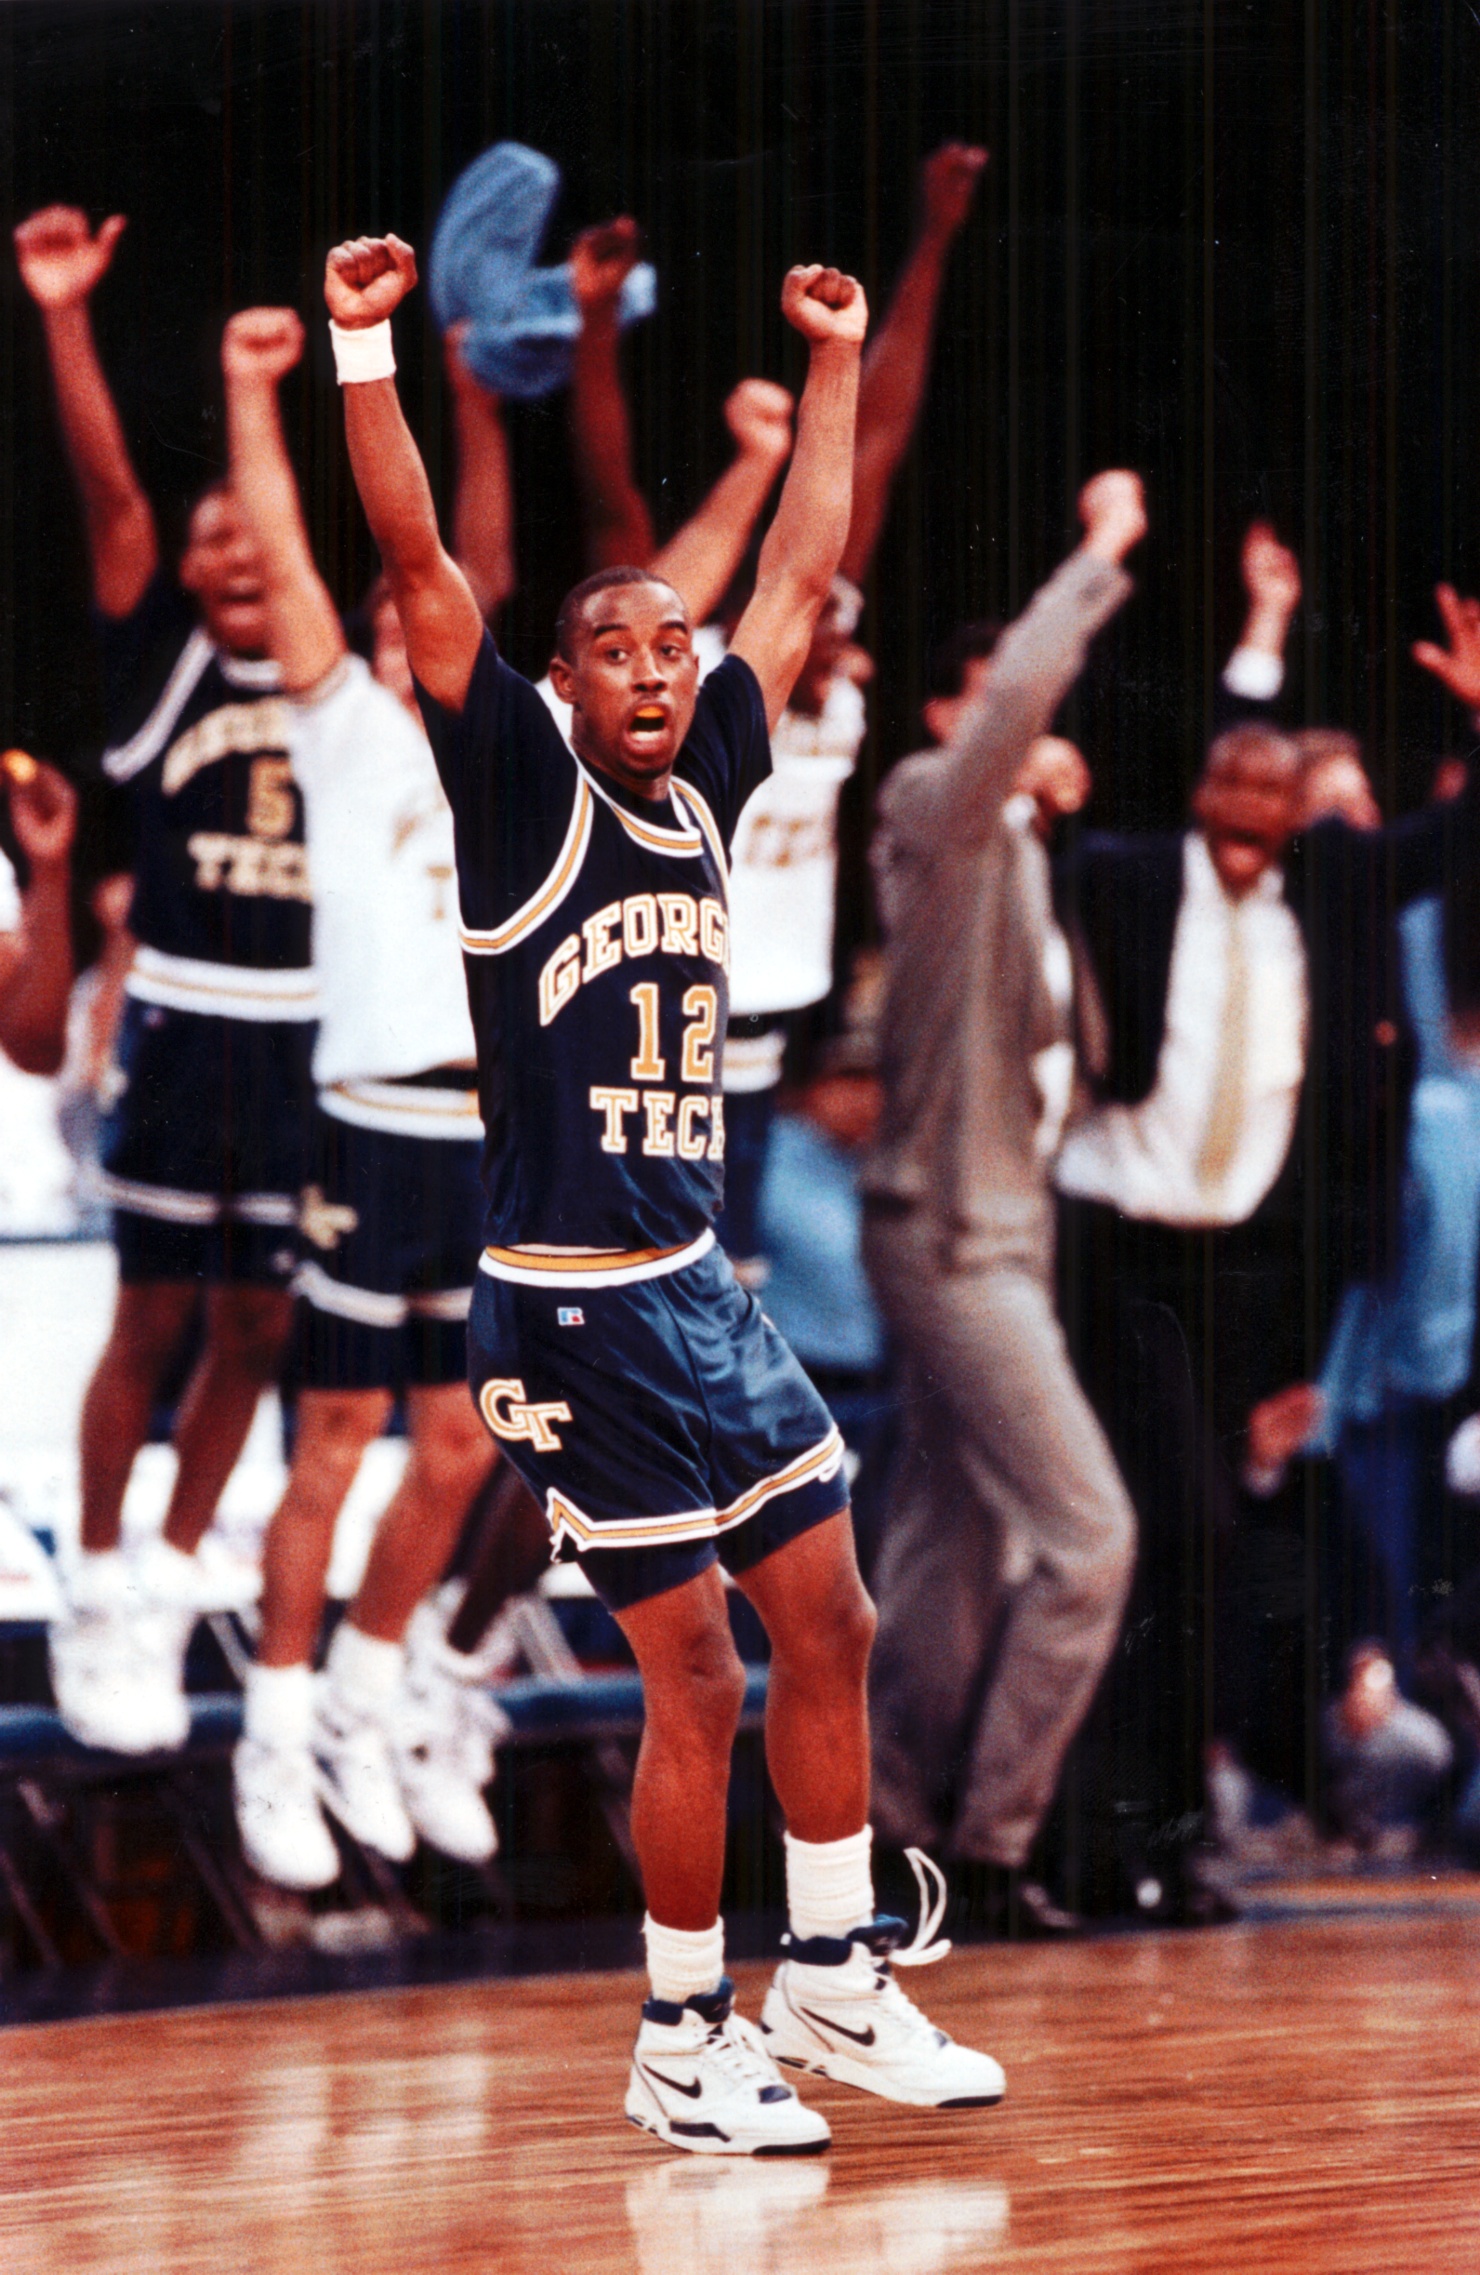 Forever game': When Kenny Anderson rocked Michigan State in NCAAs